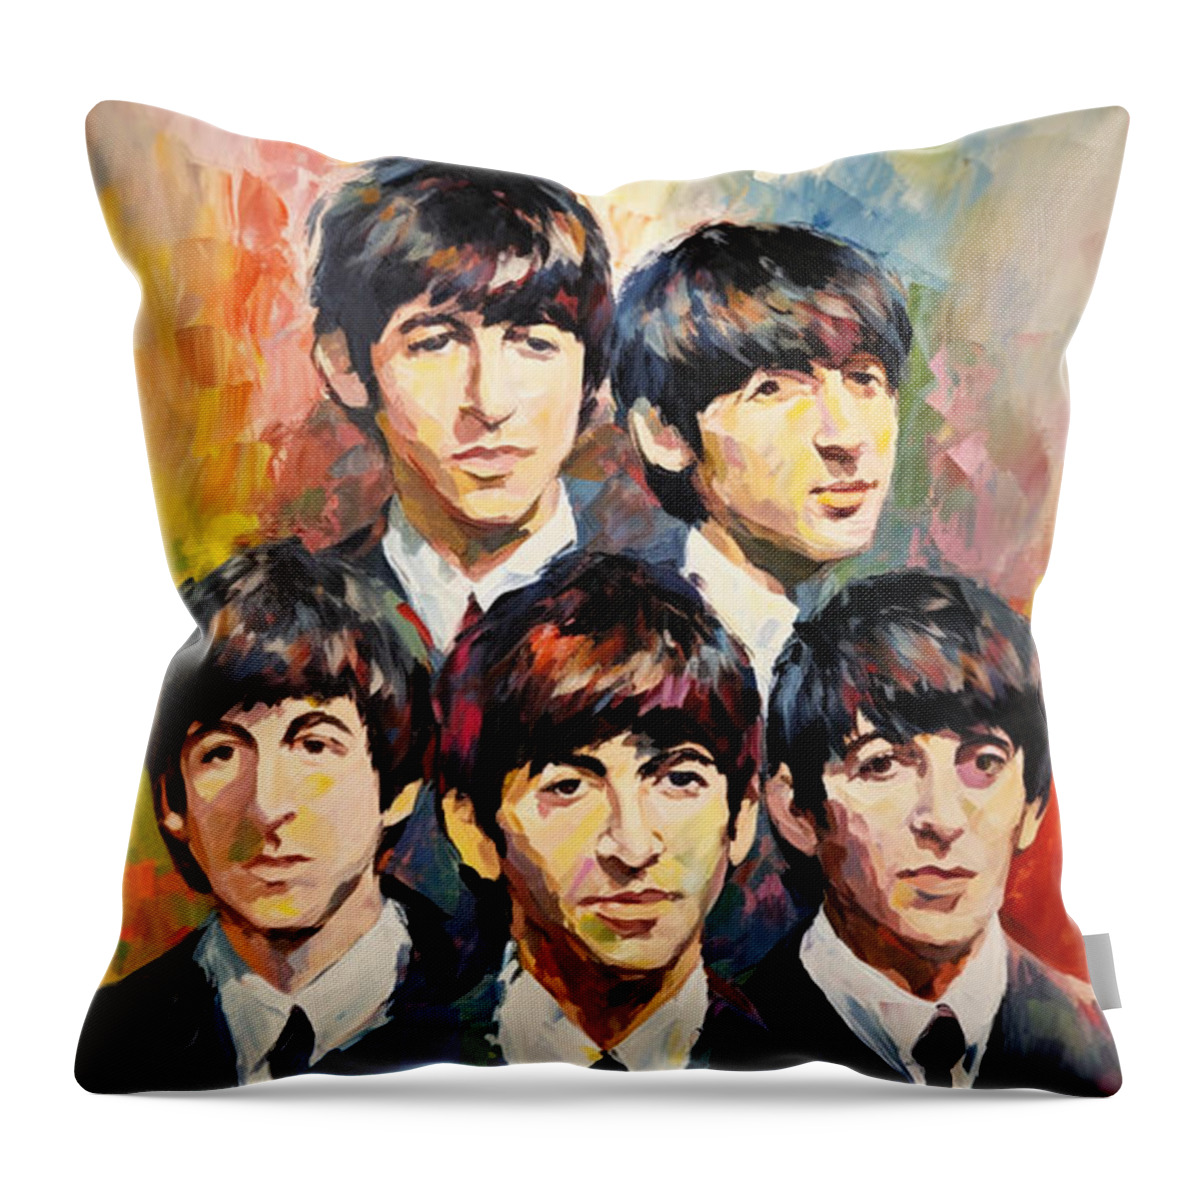 The Beatles Throw Pillow featuring the digital art The Beatles by Rob Smith's